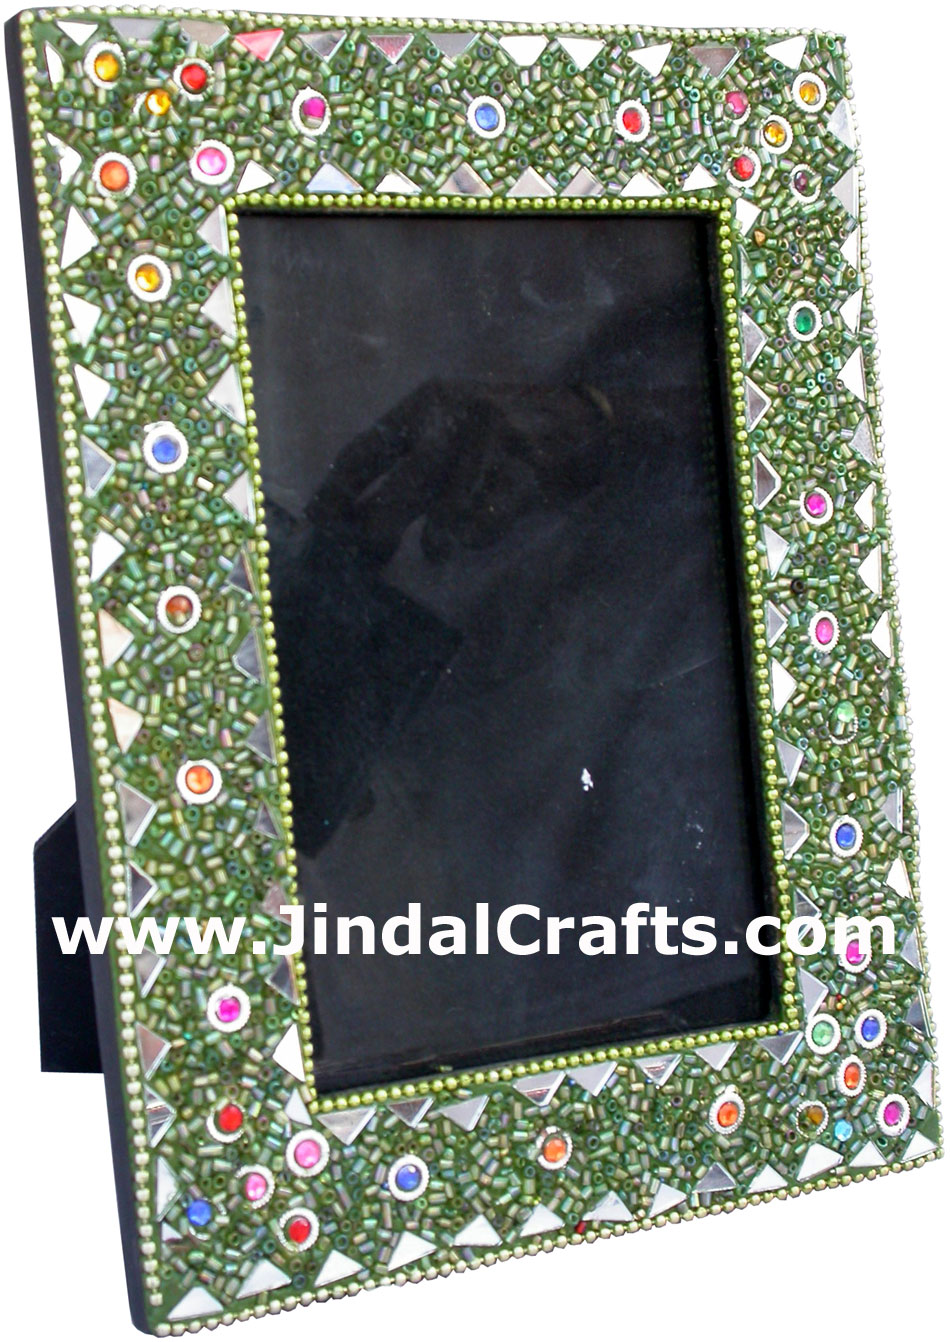 Hand Made Lac Mirror Photo Frame Rich Indian Traditional Crafts Handicrafts Arts